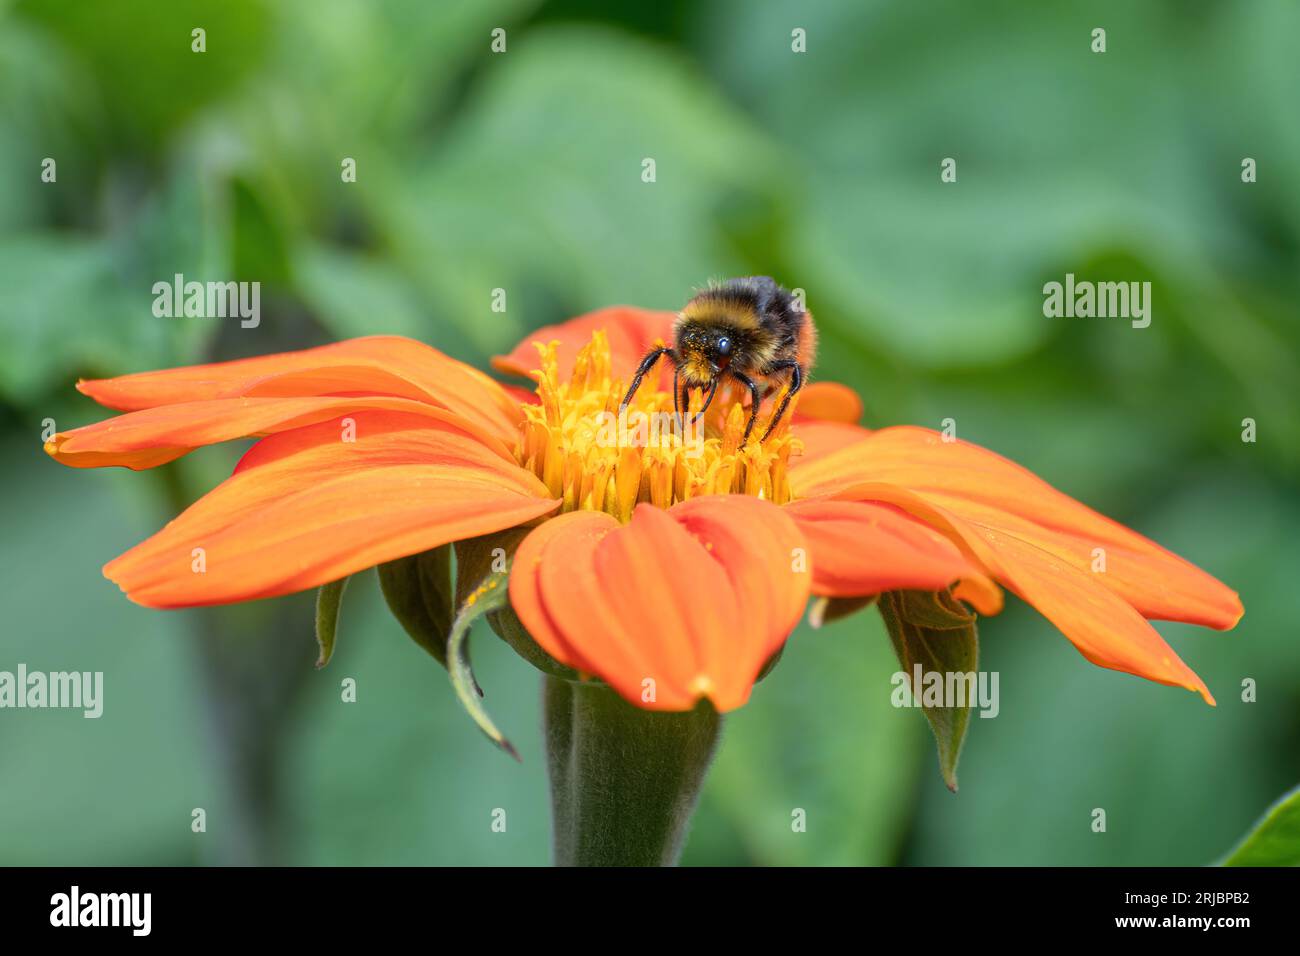 A bumblebee on a bright orange Mexican sunflower (Tithonia rotundifolia 'Torch') in a garden in summer, England, UK Stock Photo